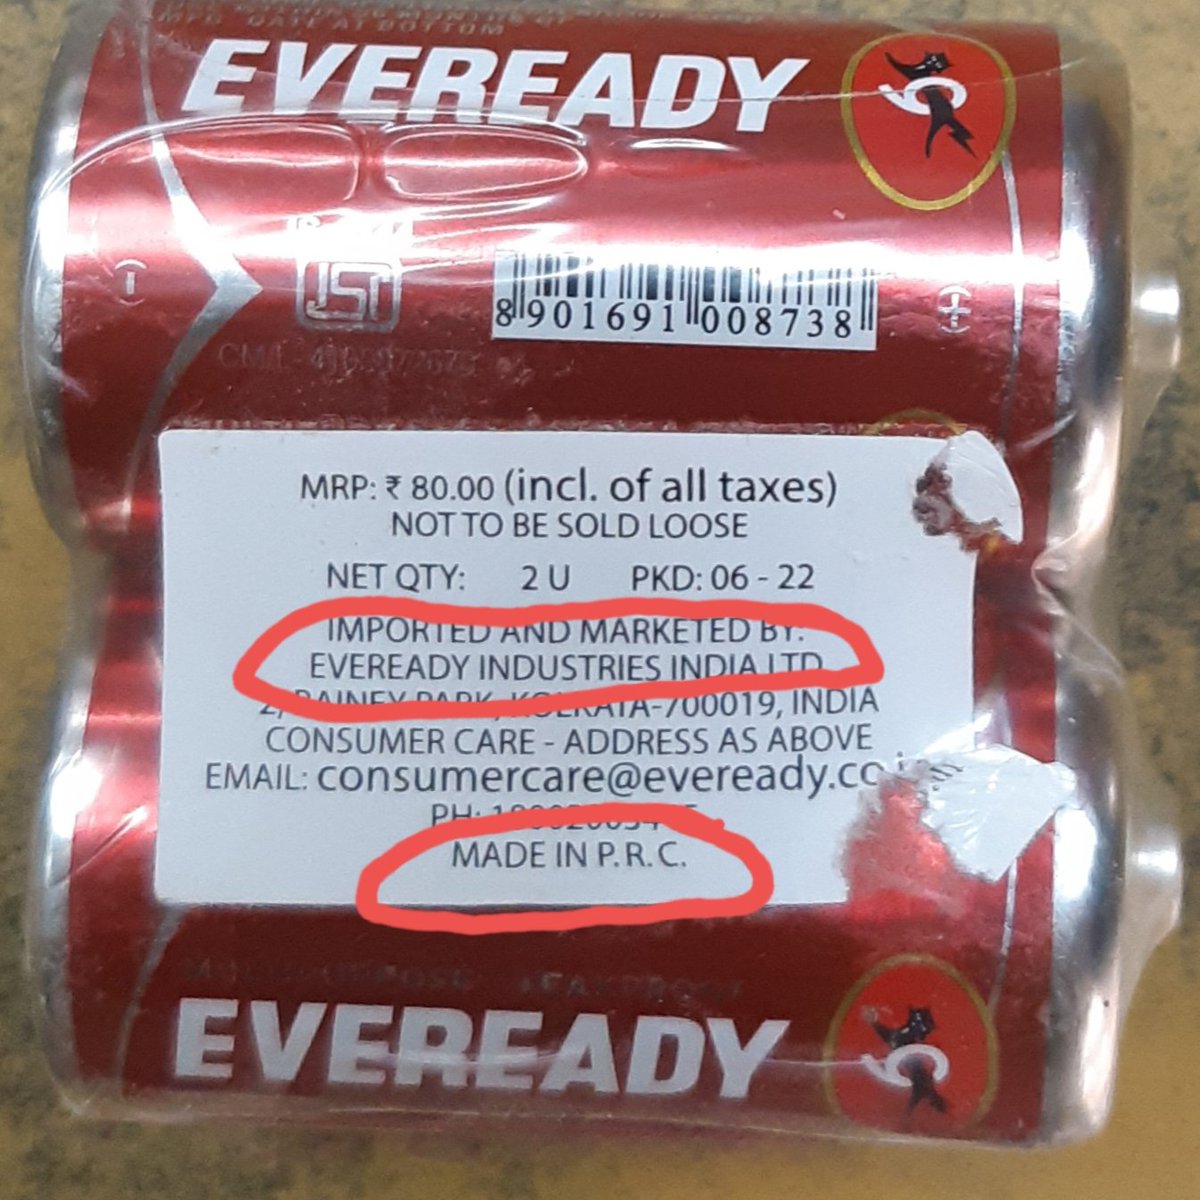 @PiyushGoyal @PMOIndia Bring to your kind notice for appropriate action in regard to harm caused to #AtmaNirbharBharatAbhiyan by @EvereadyIndia who have been marketing batteries imported from  China. Pray due penal action is taken against unscrupulous manufacturers. @narendramodi